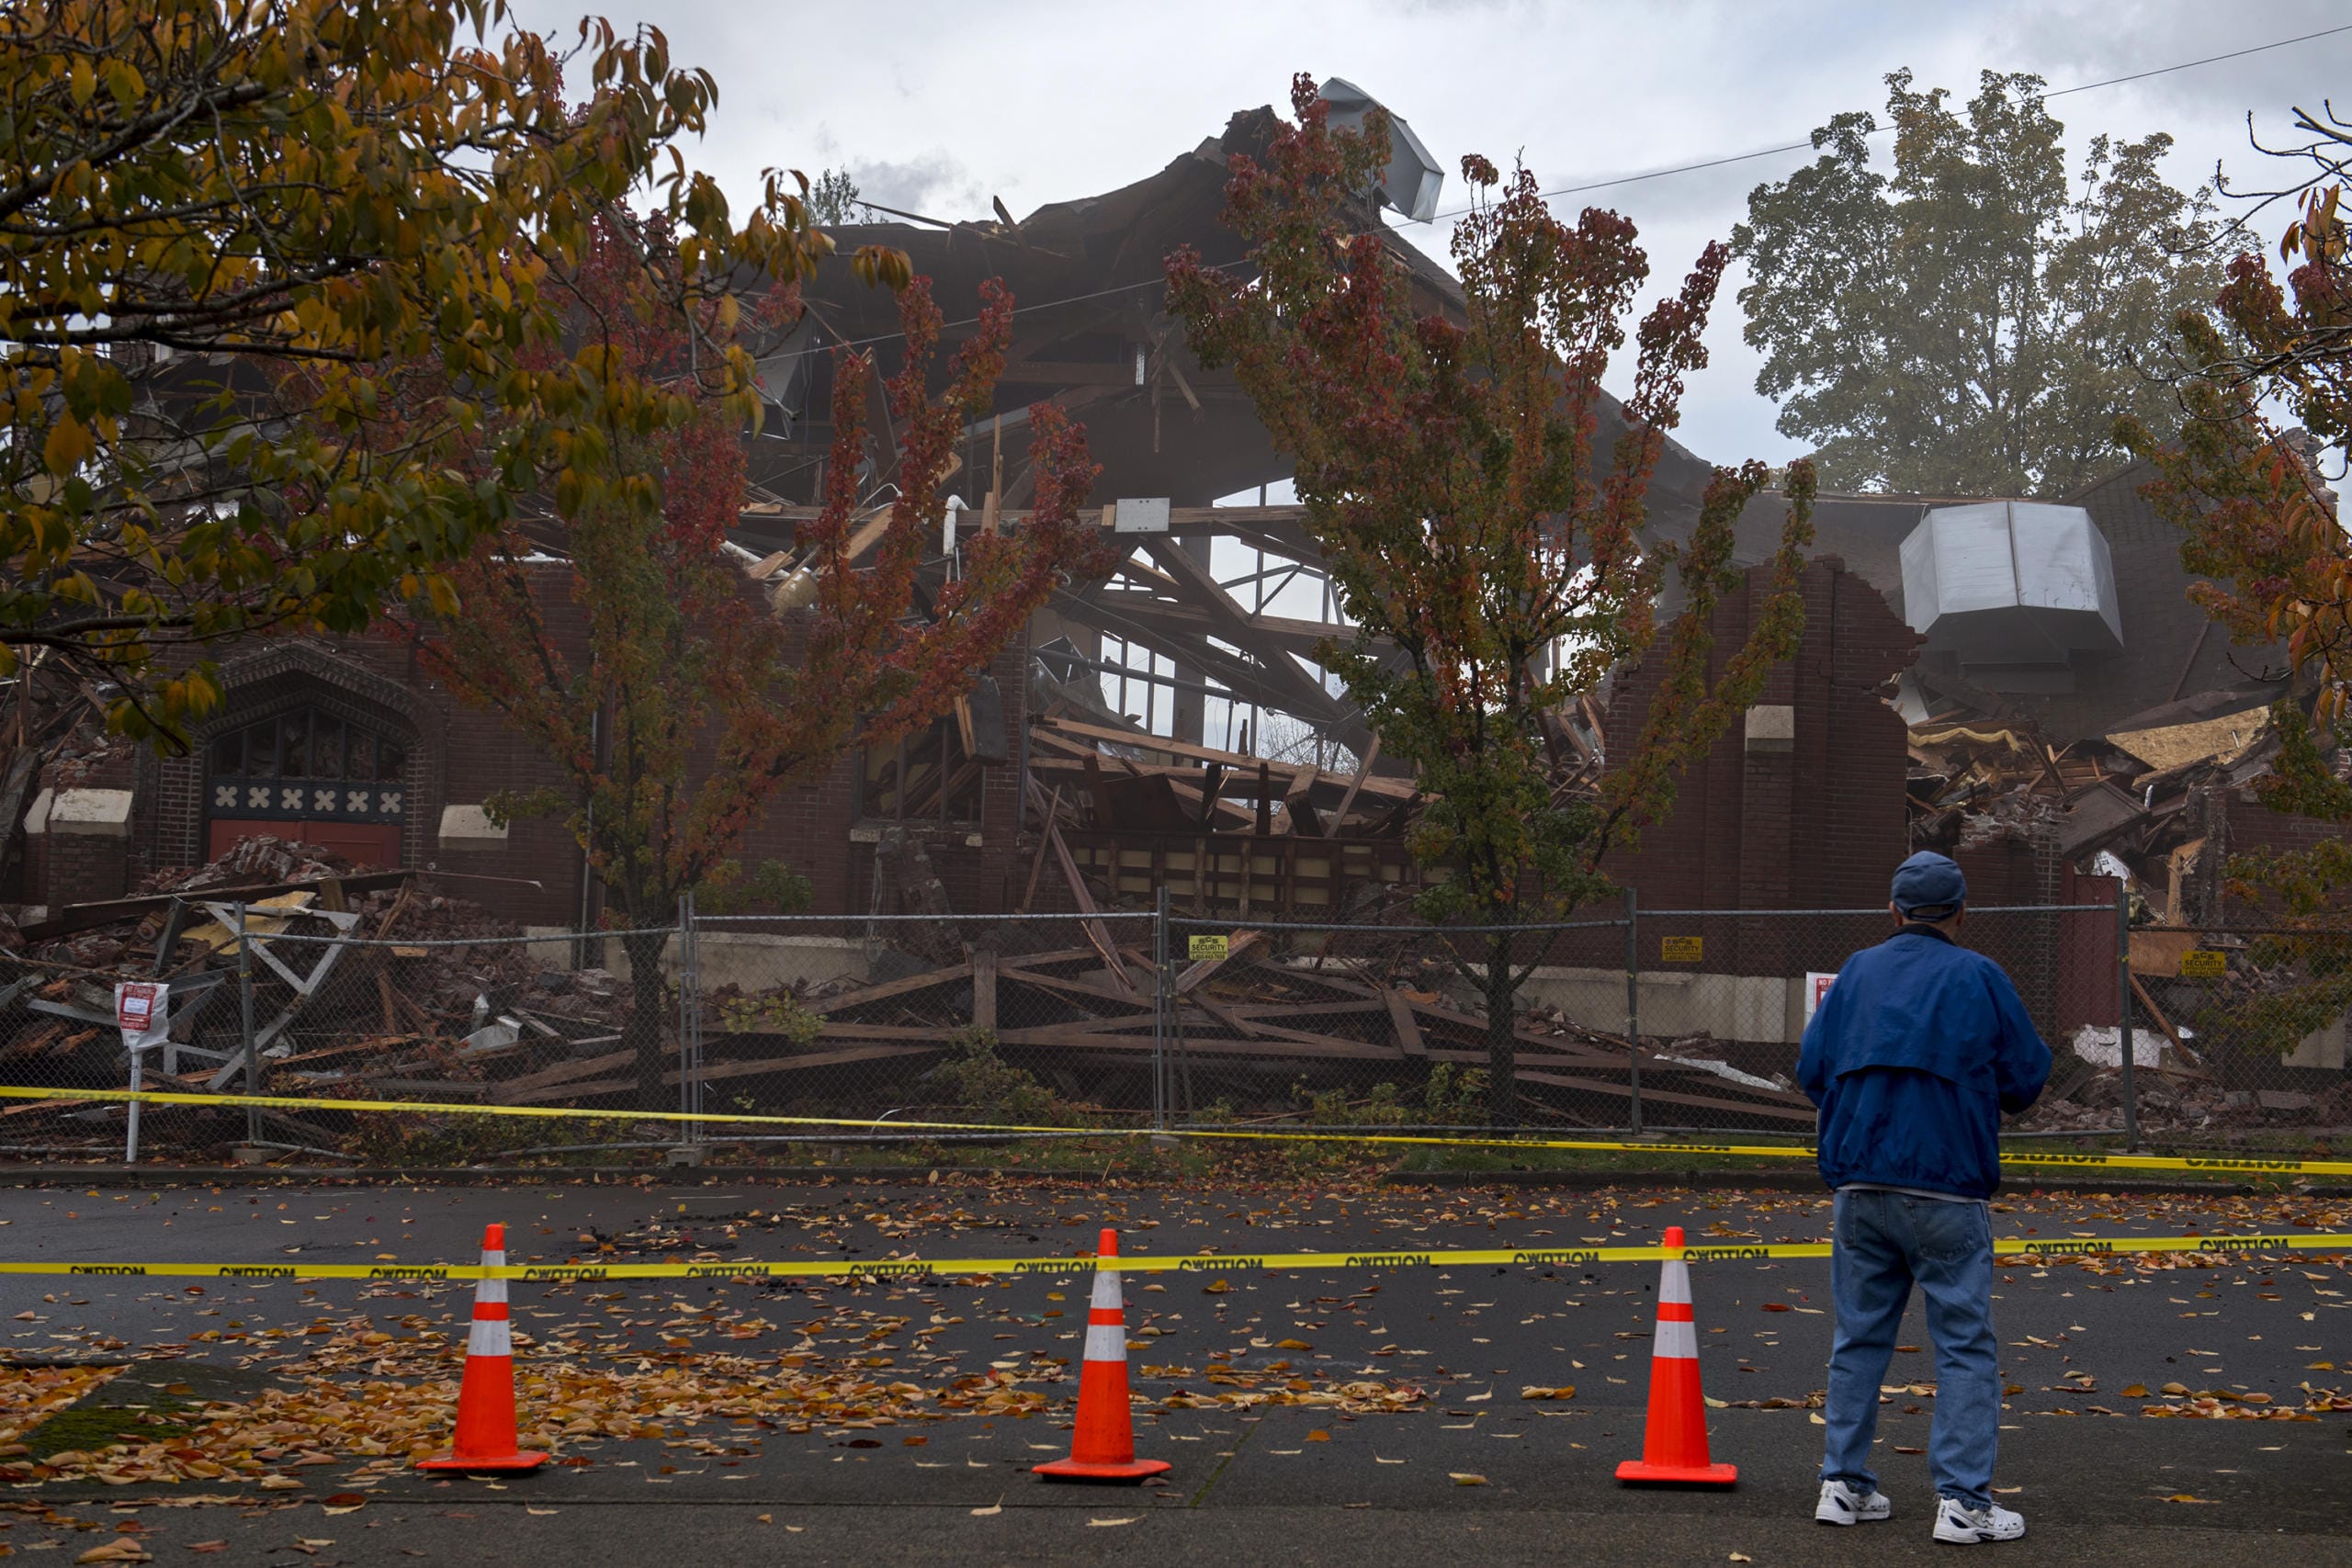 Gary Dunne of Vancouver pauses to take photos during the demolition of the former downtown location of New Heights Church on Friday morning. Dunne was joined by his wife, Marlene, who he married at the church in 1959. The couple raised three daughters there. "It just felt like home," Marlene Dunne said.